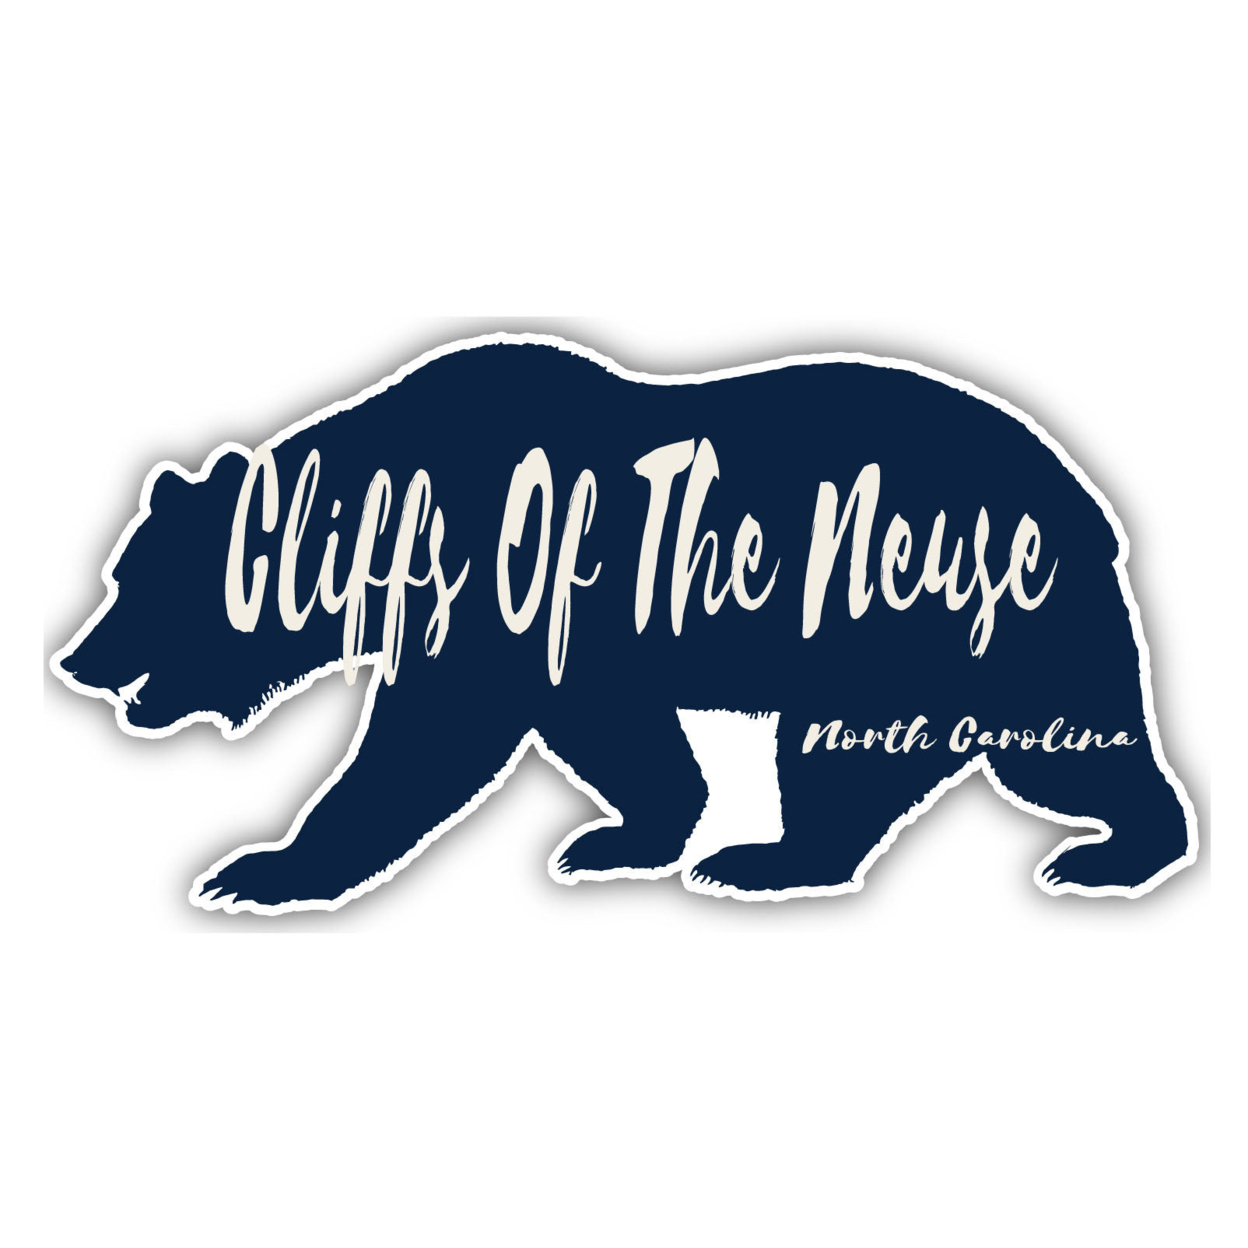 Cliffs Of The Neuse North Carolina Souvenir Decorative Stickers (Choose Theme And Size) - 4-Pack, 6-Inch, Bear